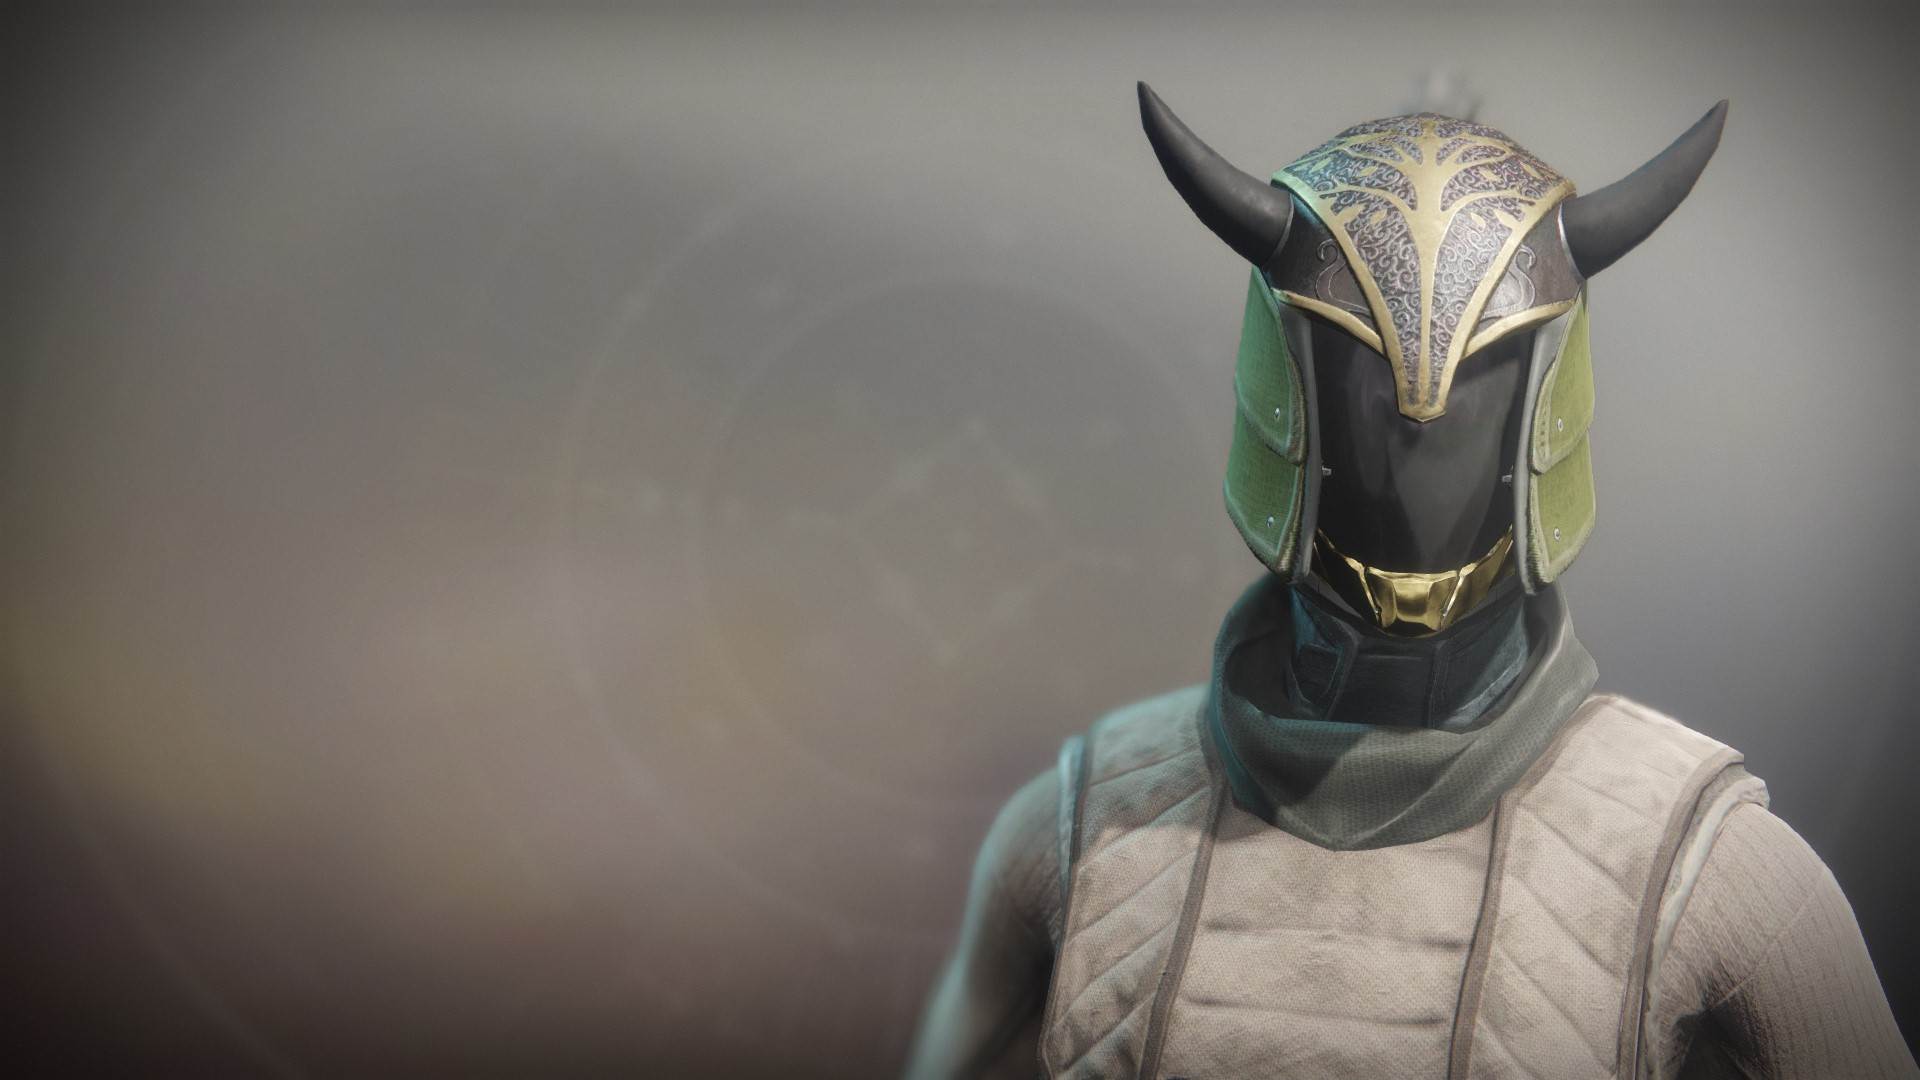 An in-game render of the Iron Truage Hood.